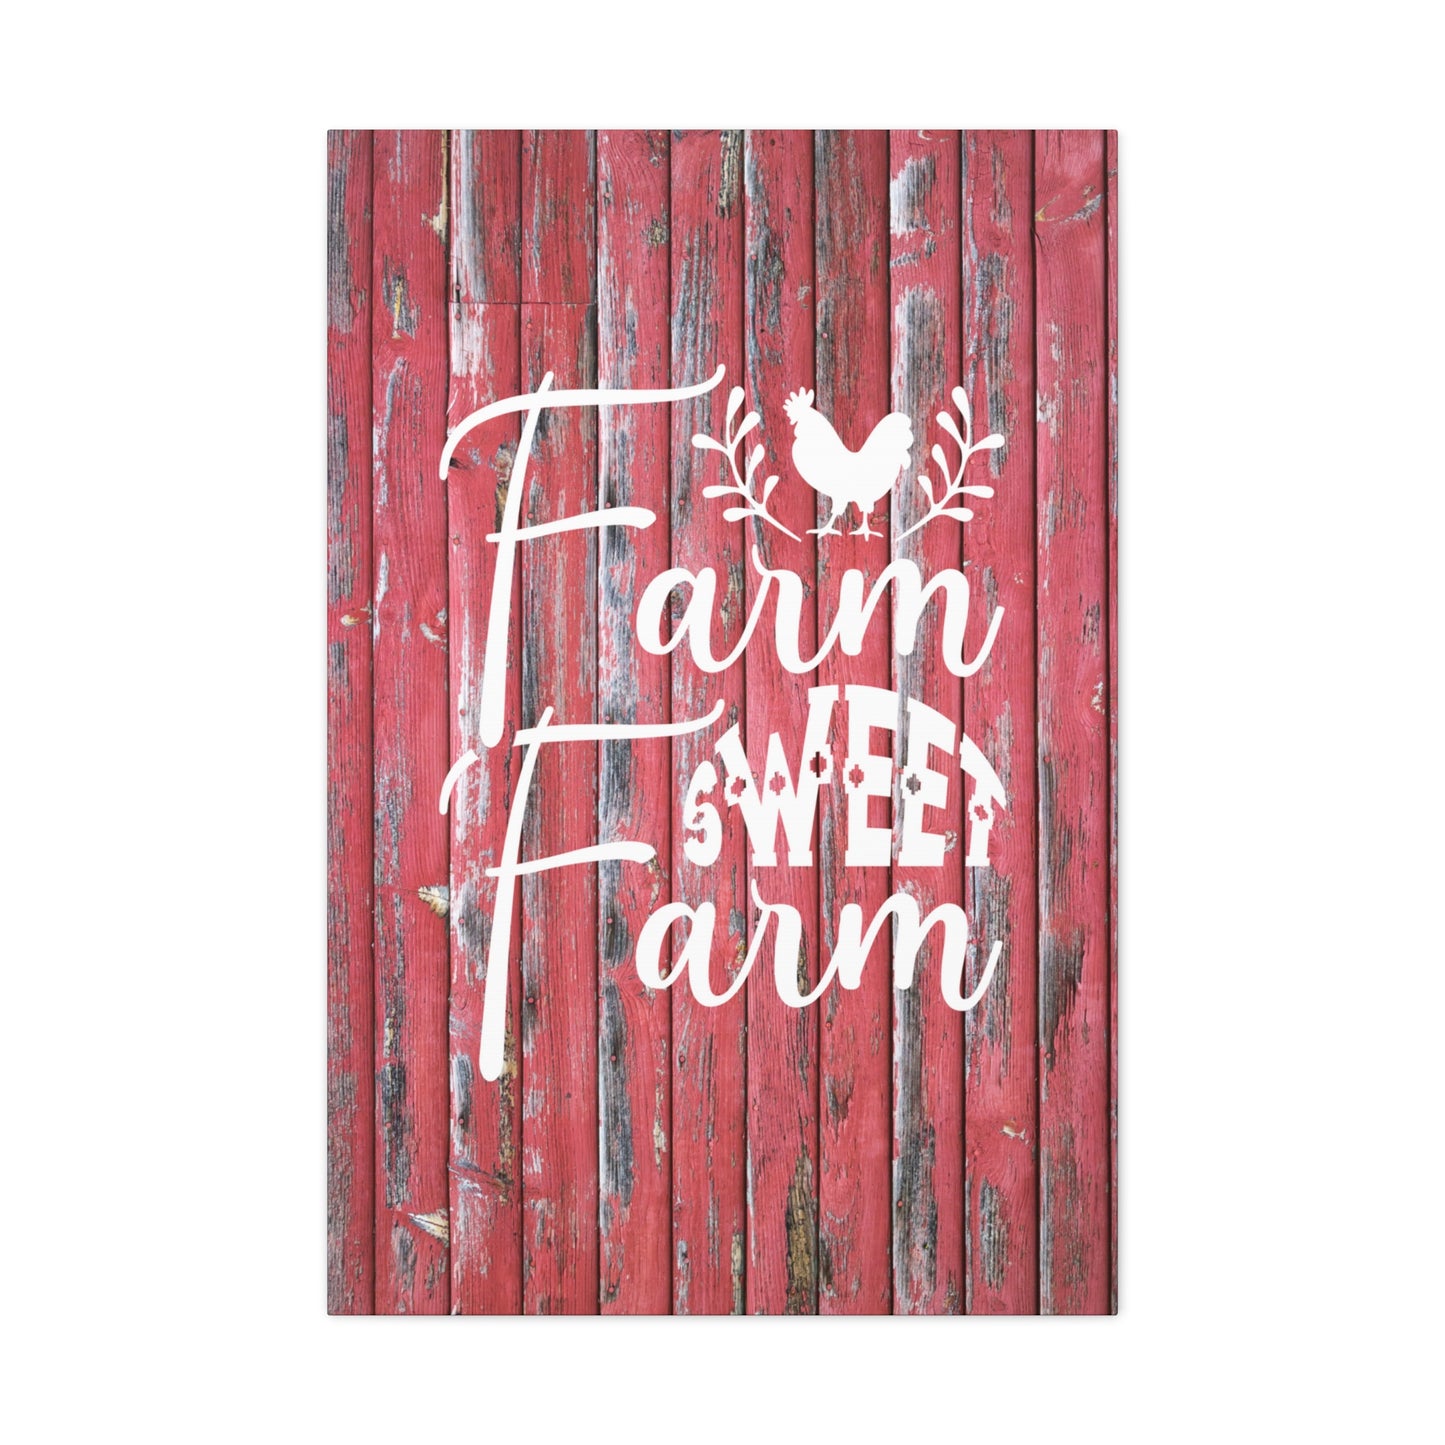 "Farm Sweet Farm" Wall Art - Weave Got Gifts - Unique Gifts You Won’t Find Anywhere Else!